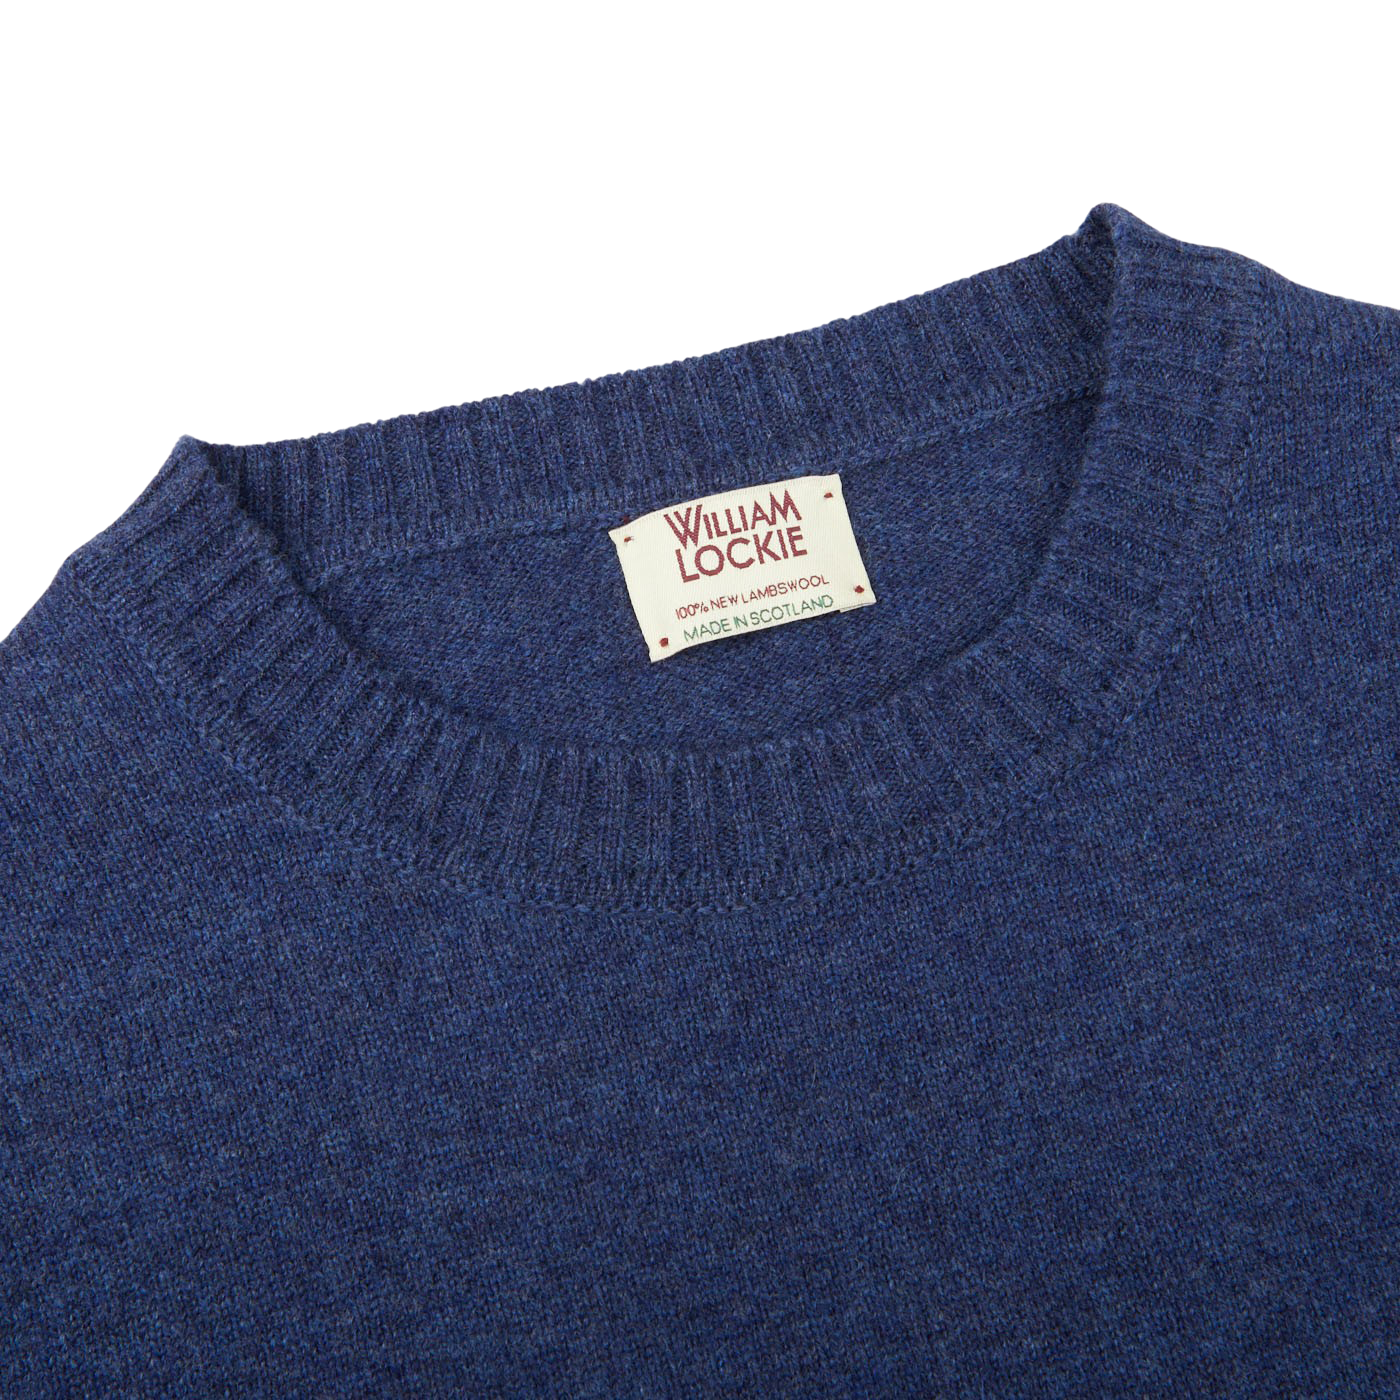 A William Lockie Rhapsody Blue Crew Neck Lambswool Sweater with a label on it.